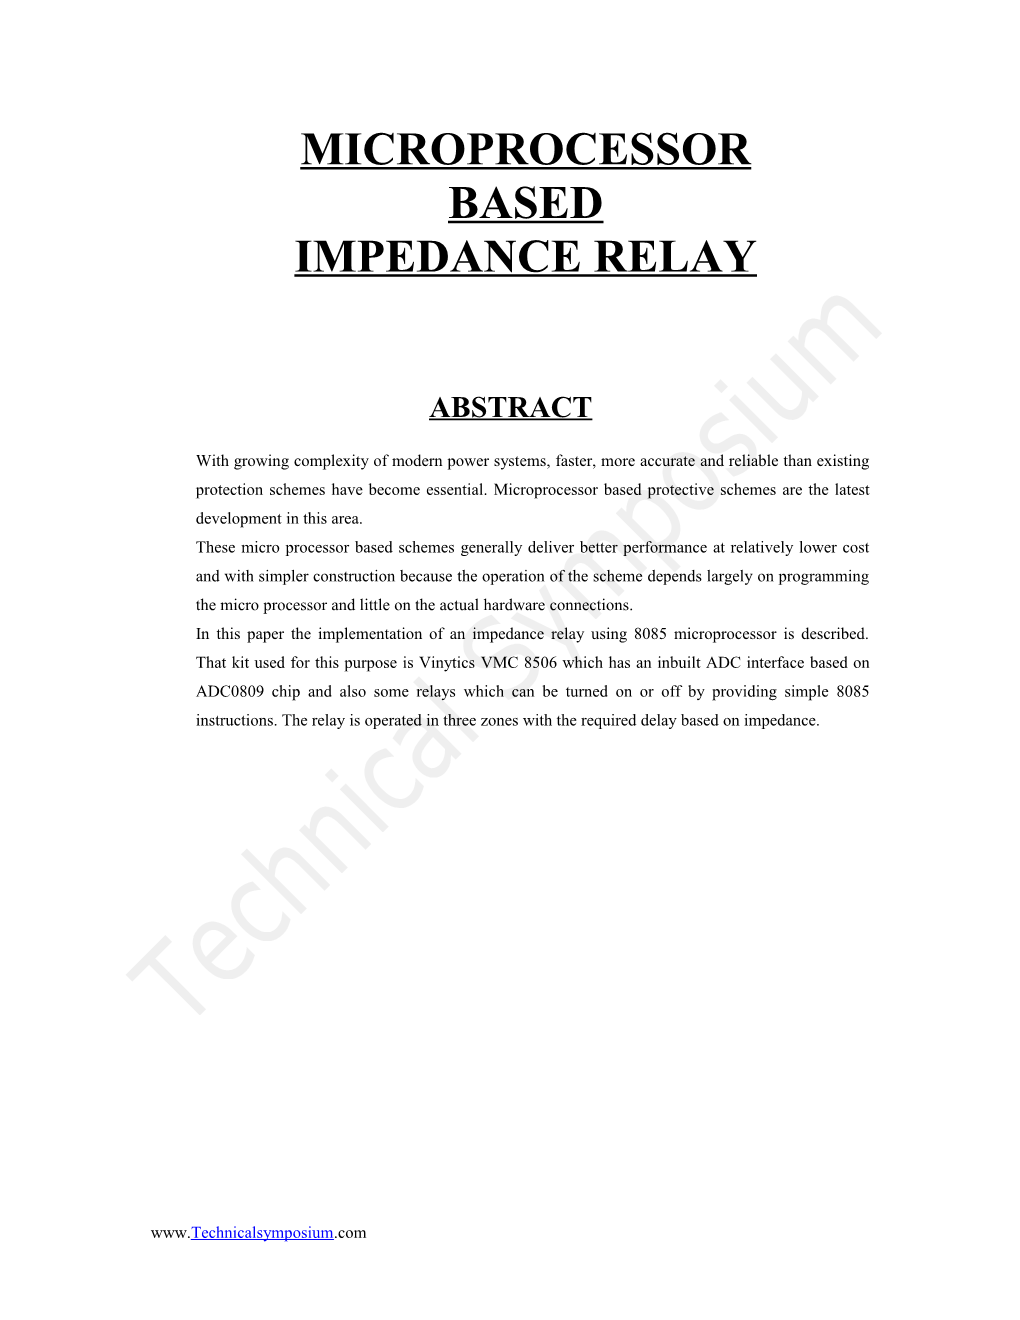 Operrating Priciple of the Impedance Relay